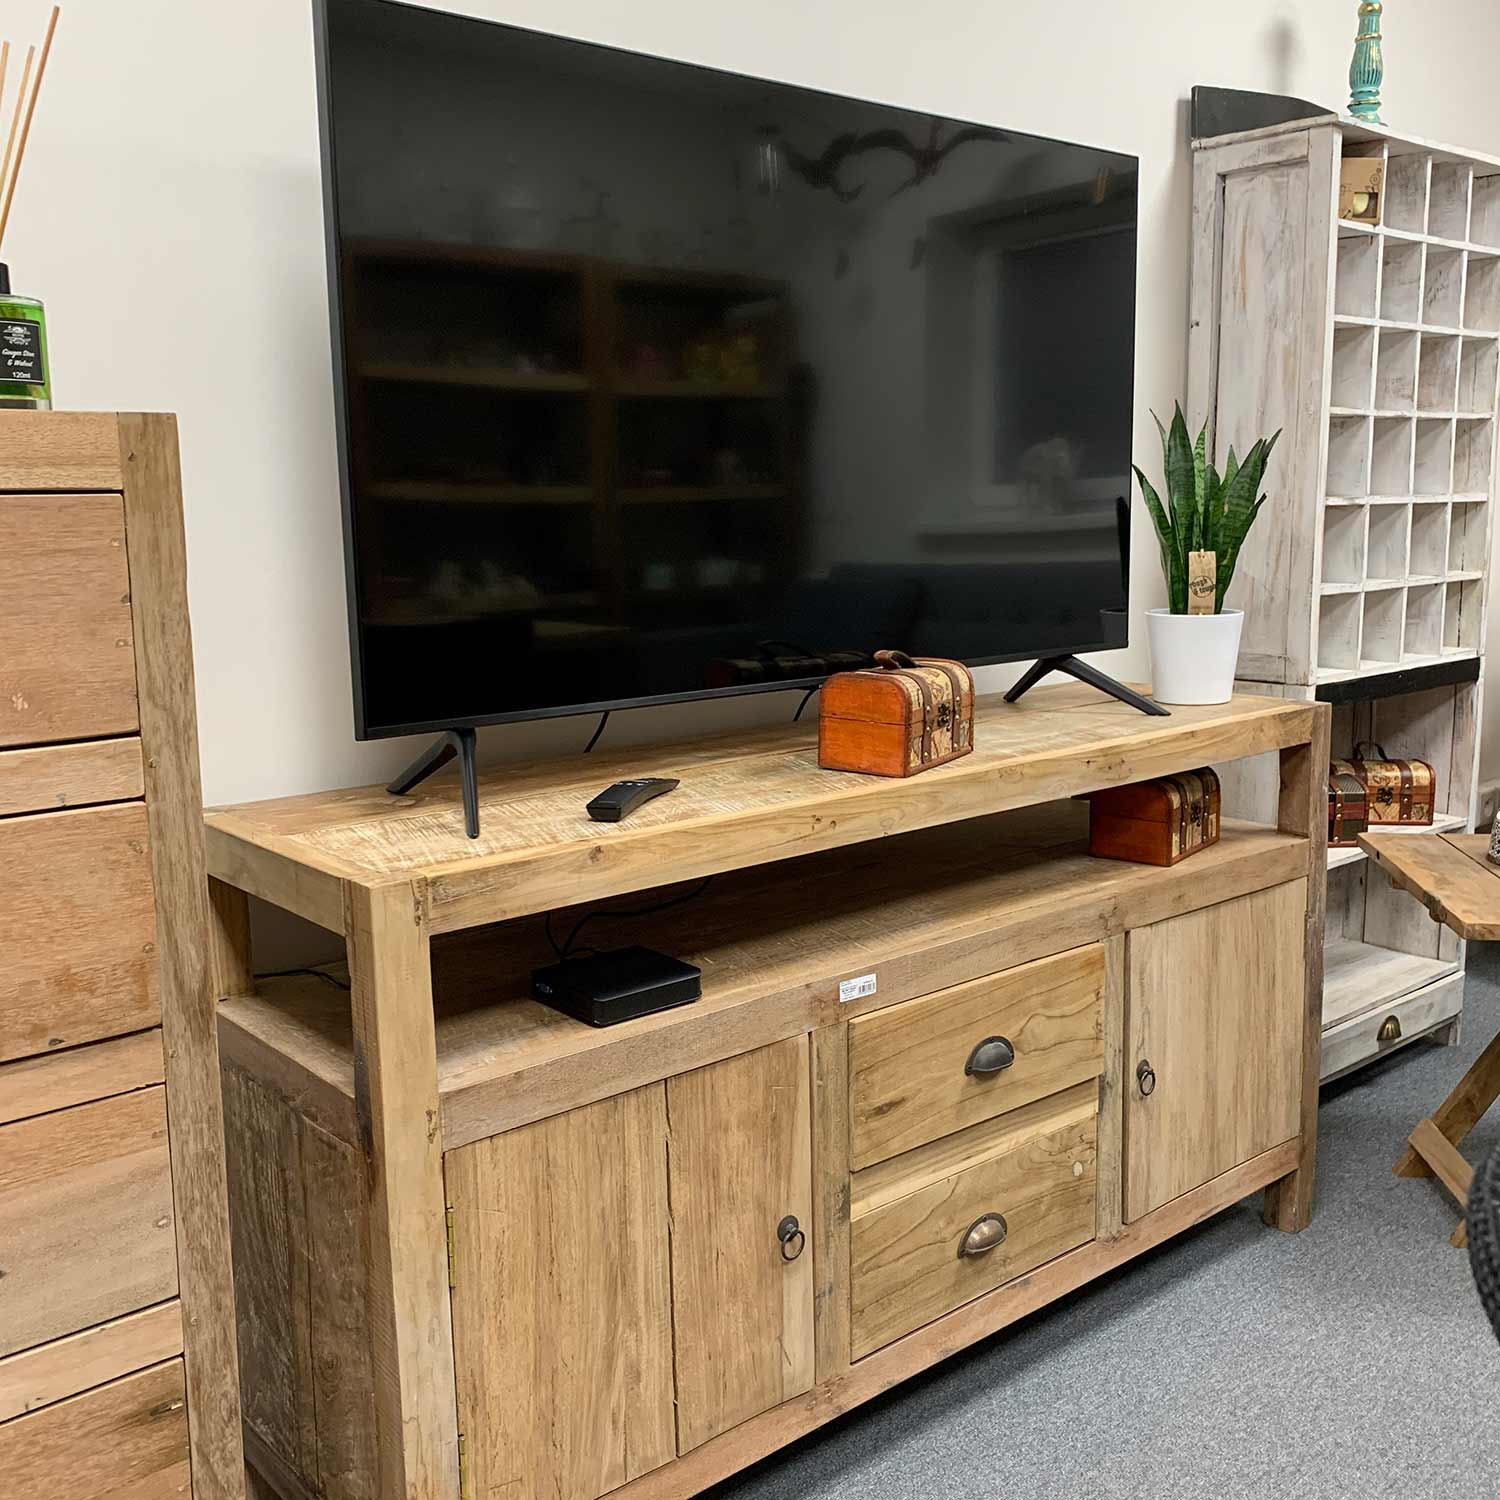 Large upcycled wood TV Stand